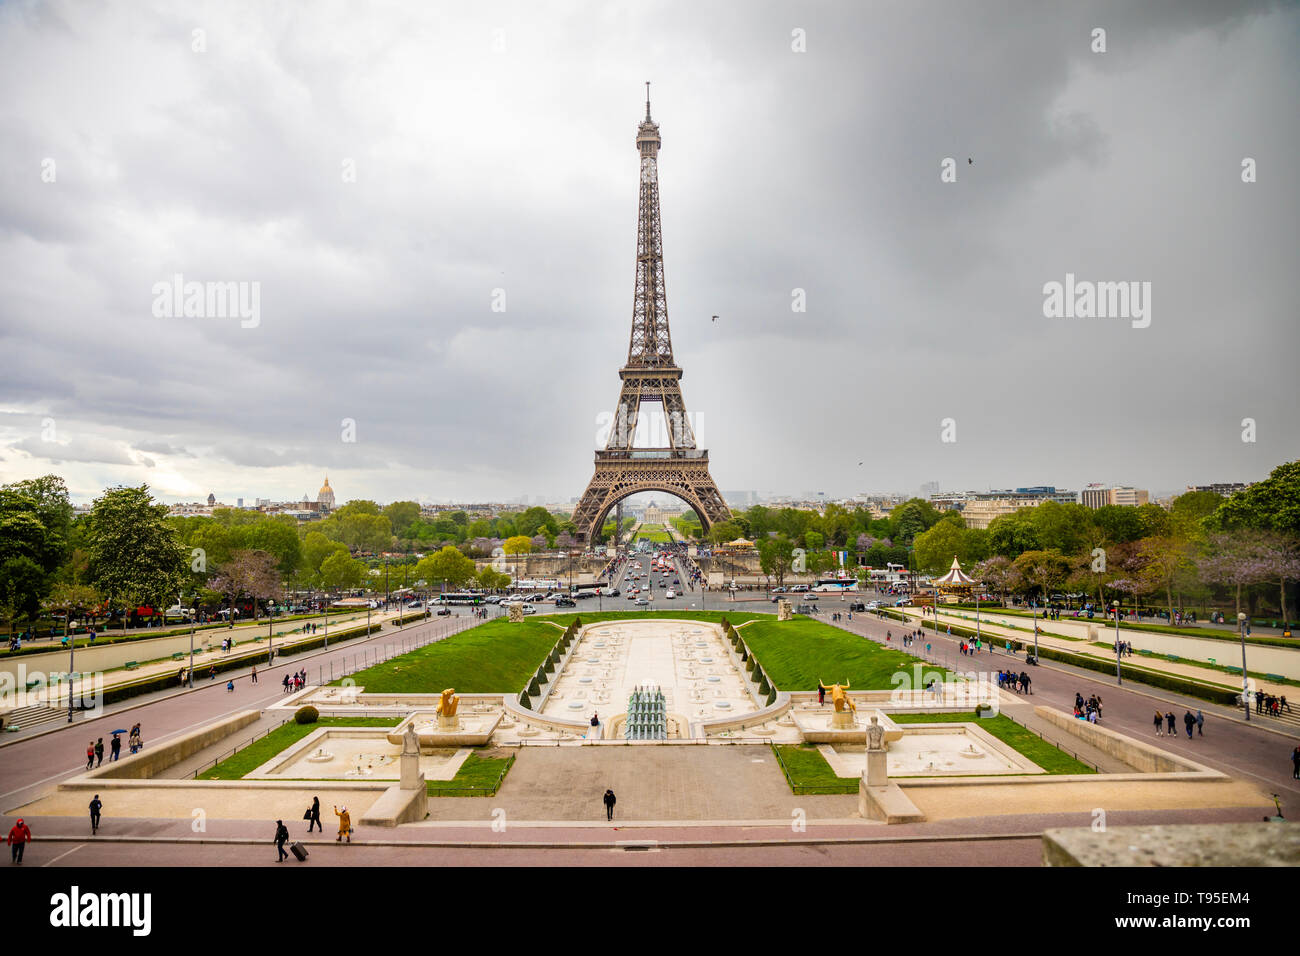 Paris, France - 24.04.2019: Aerial view of Tower Eiffel on beautiful cloudy sky in Paris, France Stock Photo